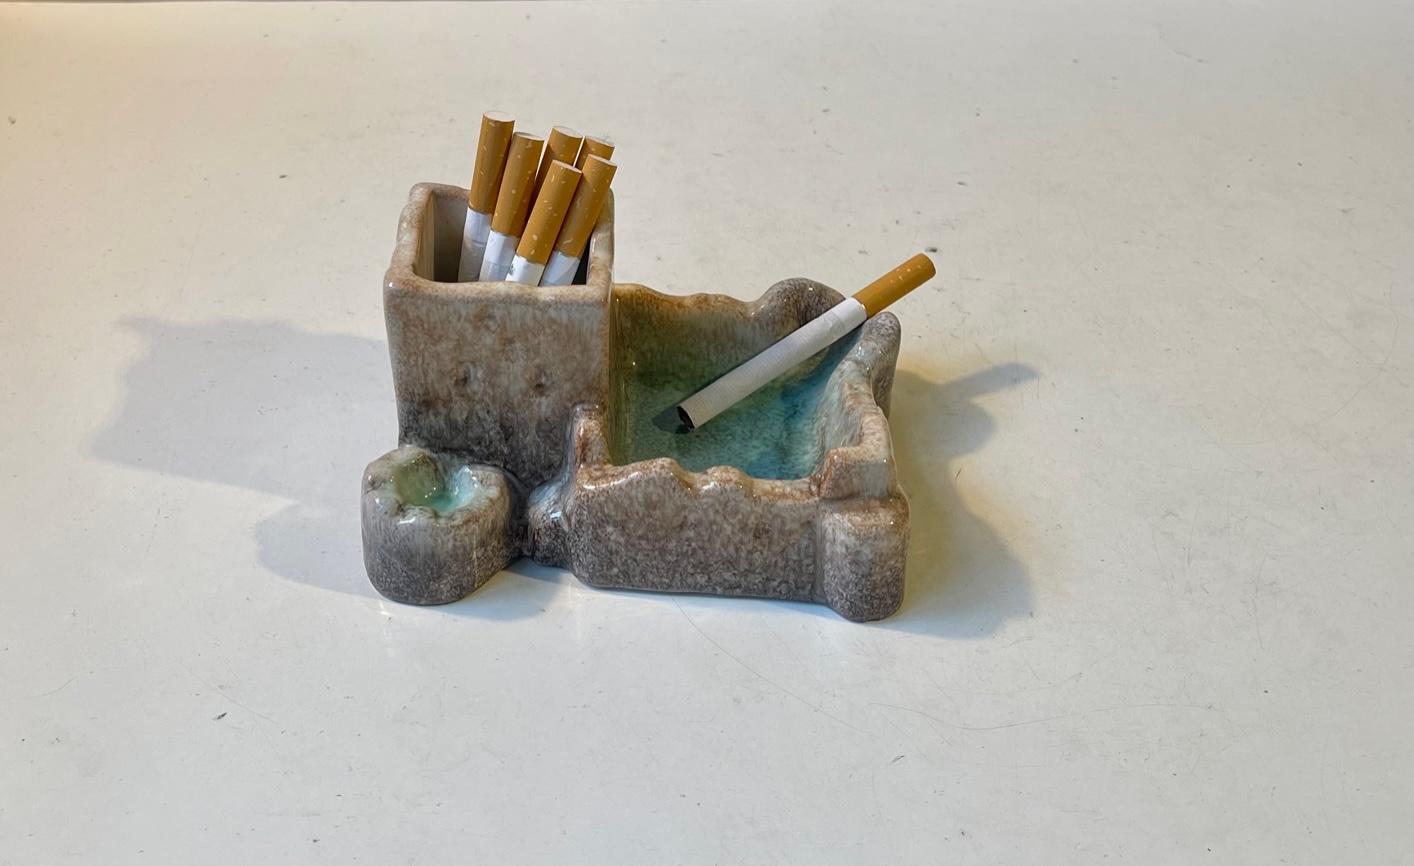 An unusual, nostalgic, political incorrect and very rare object in the shape of this smoker's station. In Denmark referred to as 'smoke Lagoon'. It dates to the mid-late 1950s and in executed in Persia Glazed pottery. Made at Michael Andersen & Son